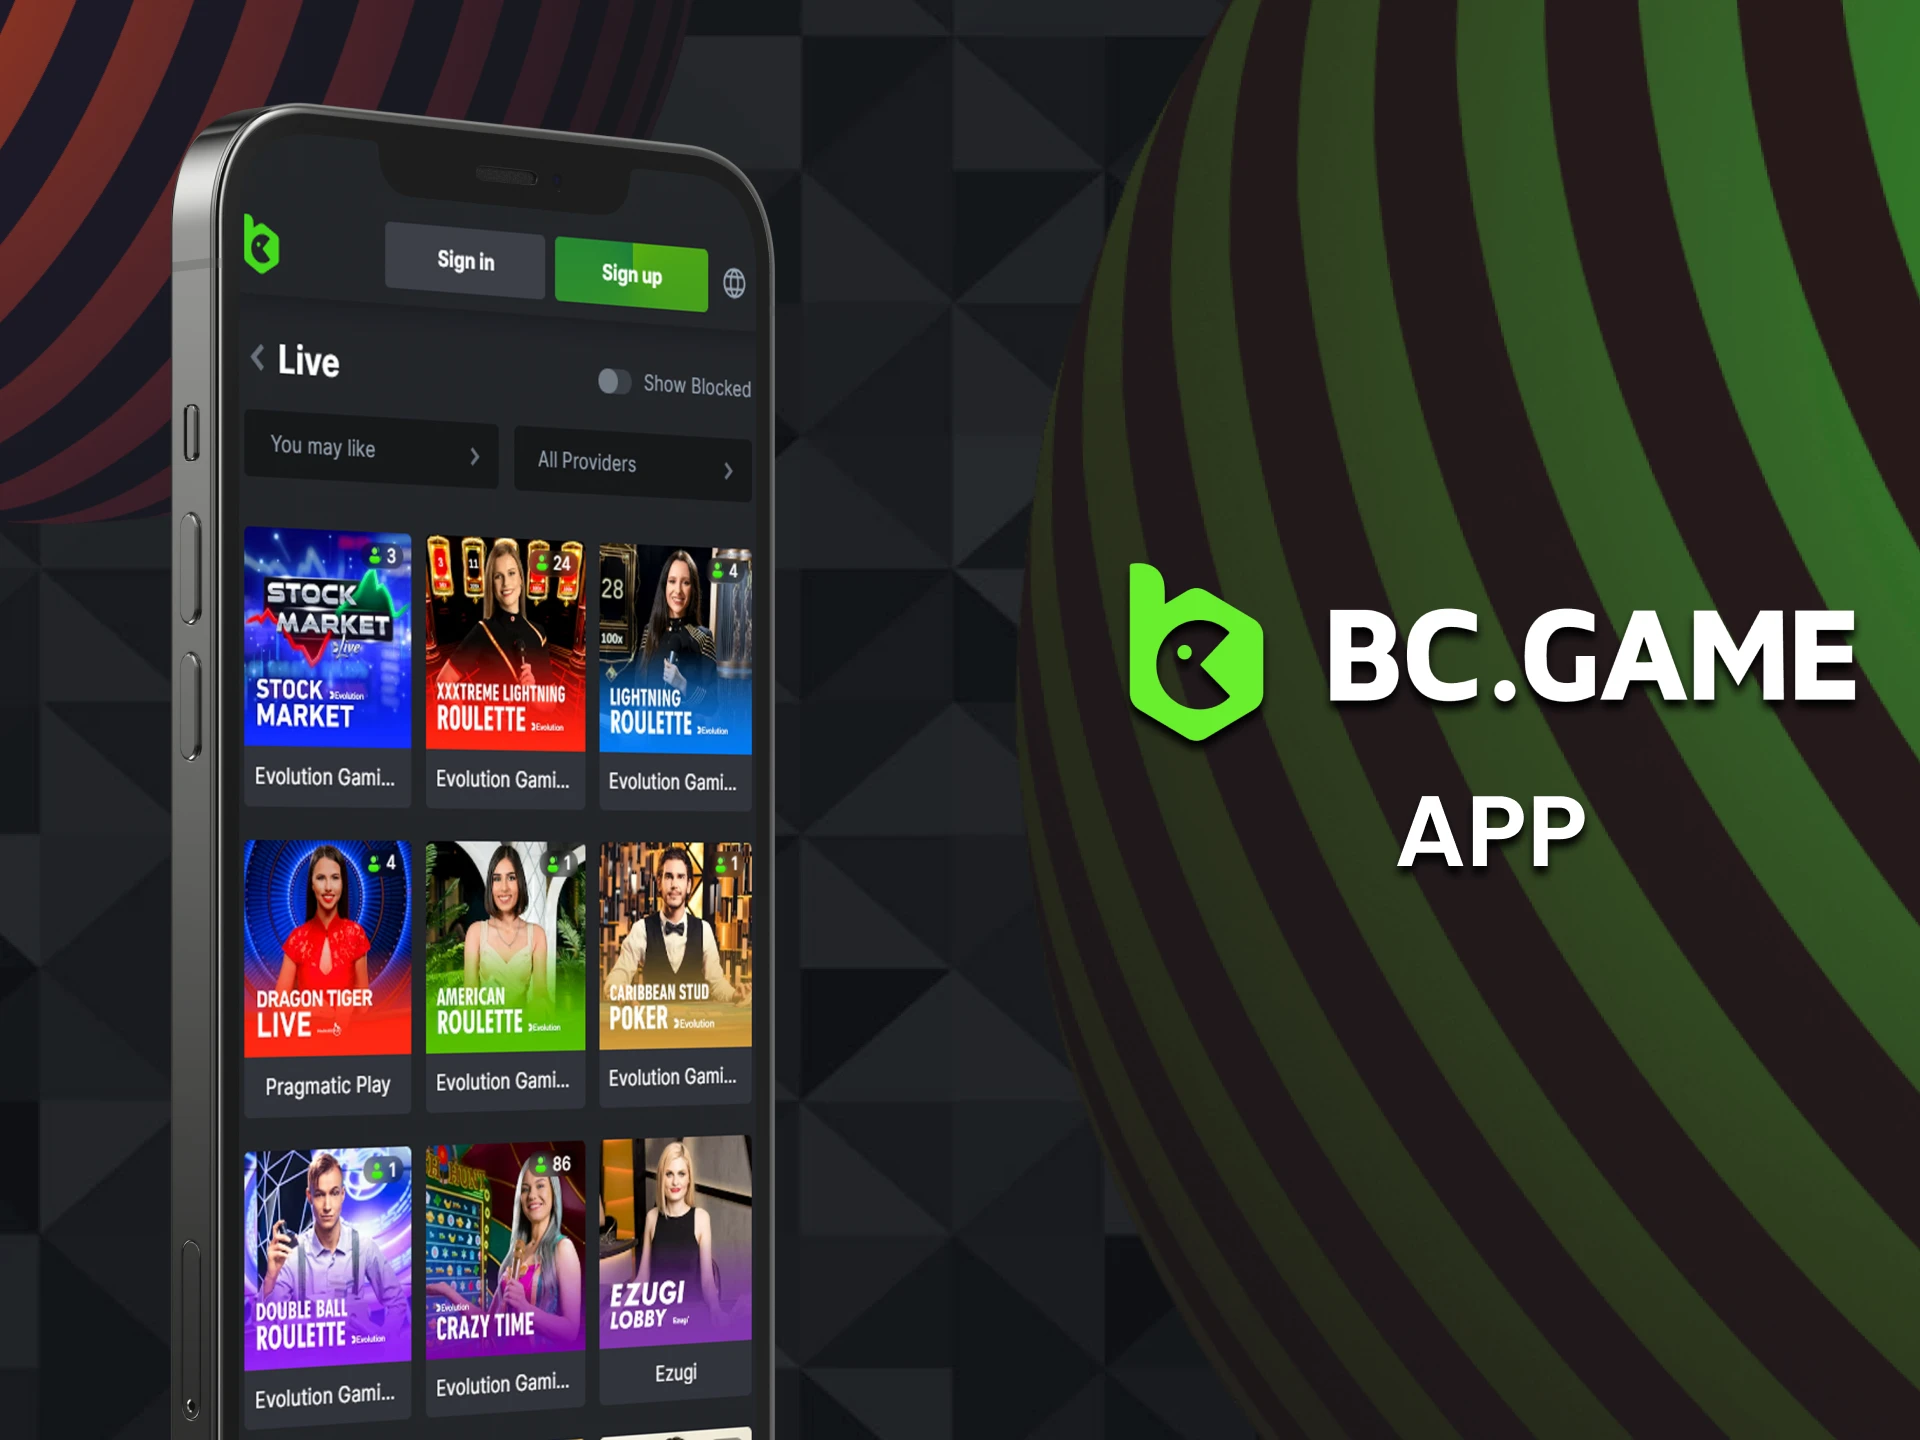 You can play live casinos through the BC Game app on your smartphone.